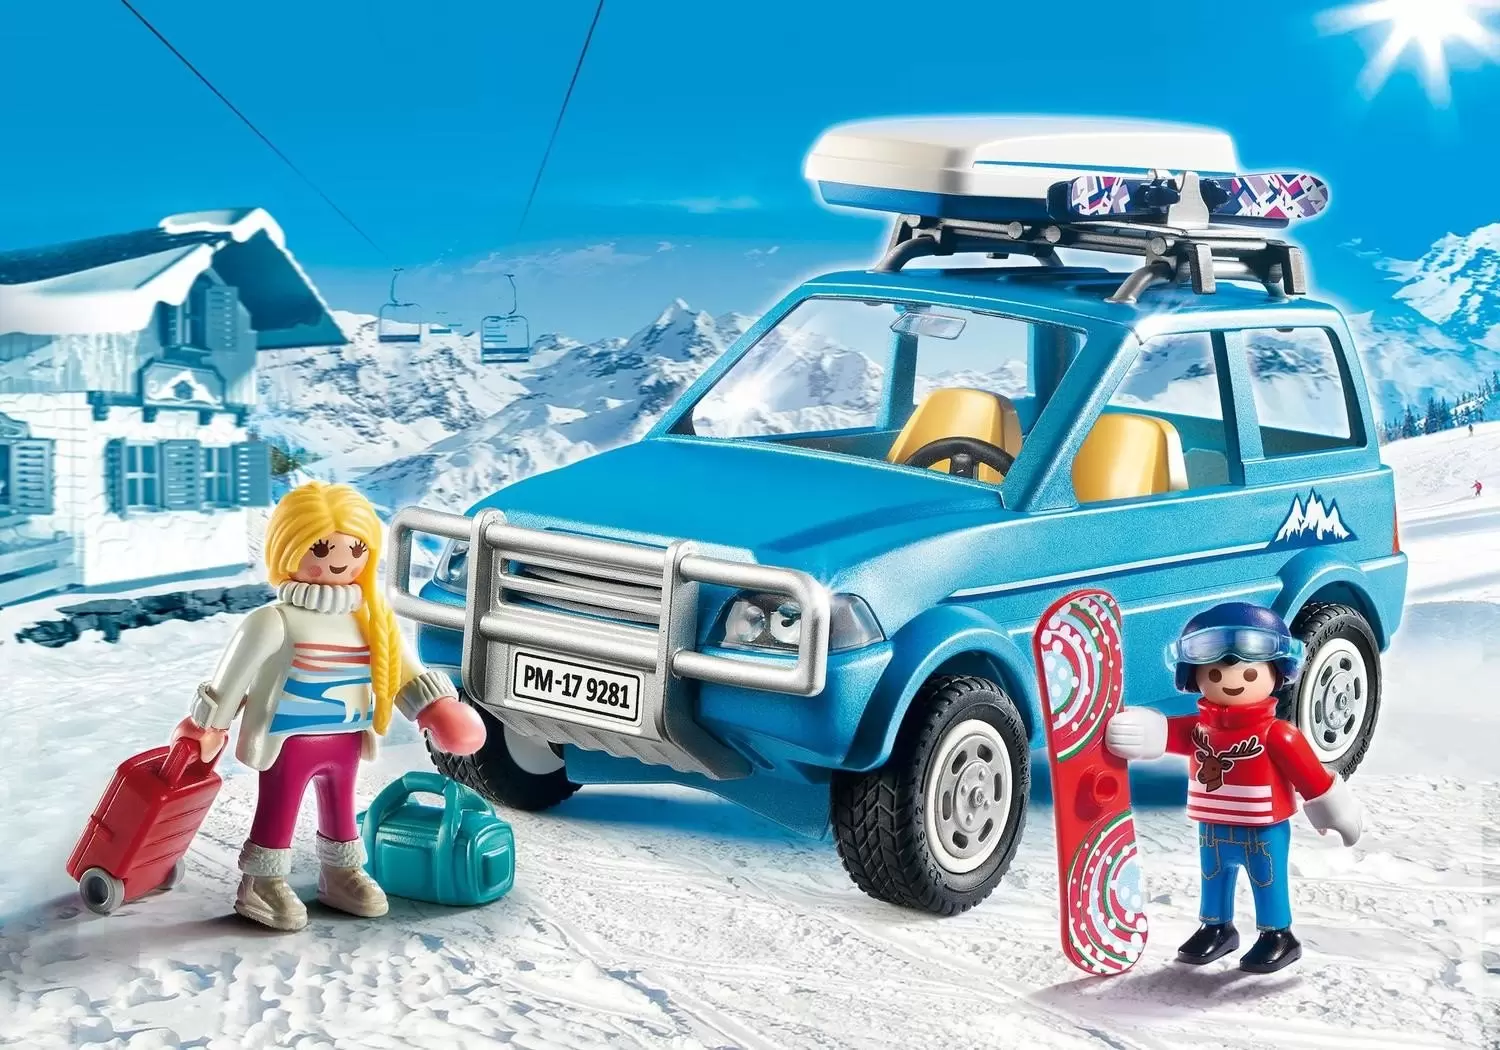 Playmobil Winter sports - Car with roof box